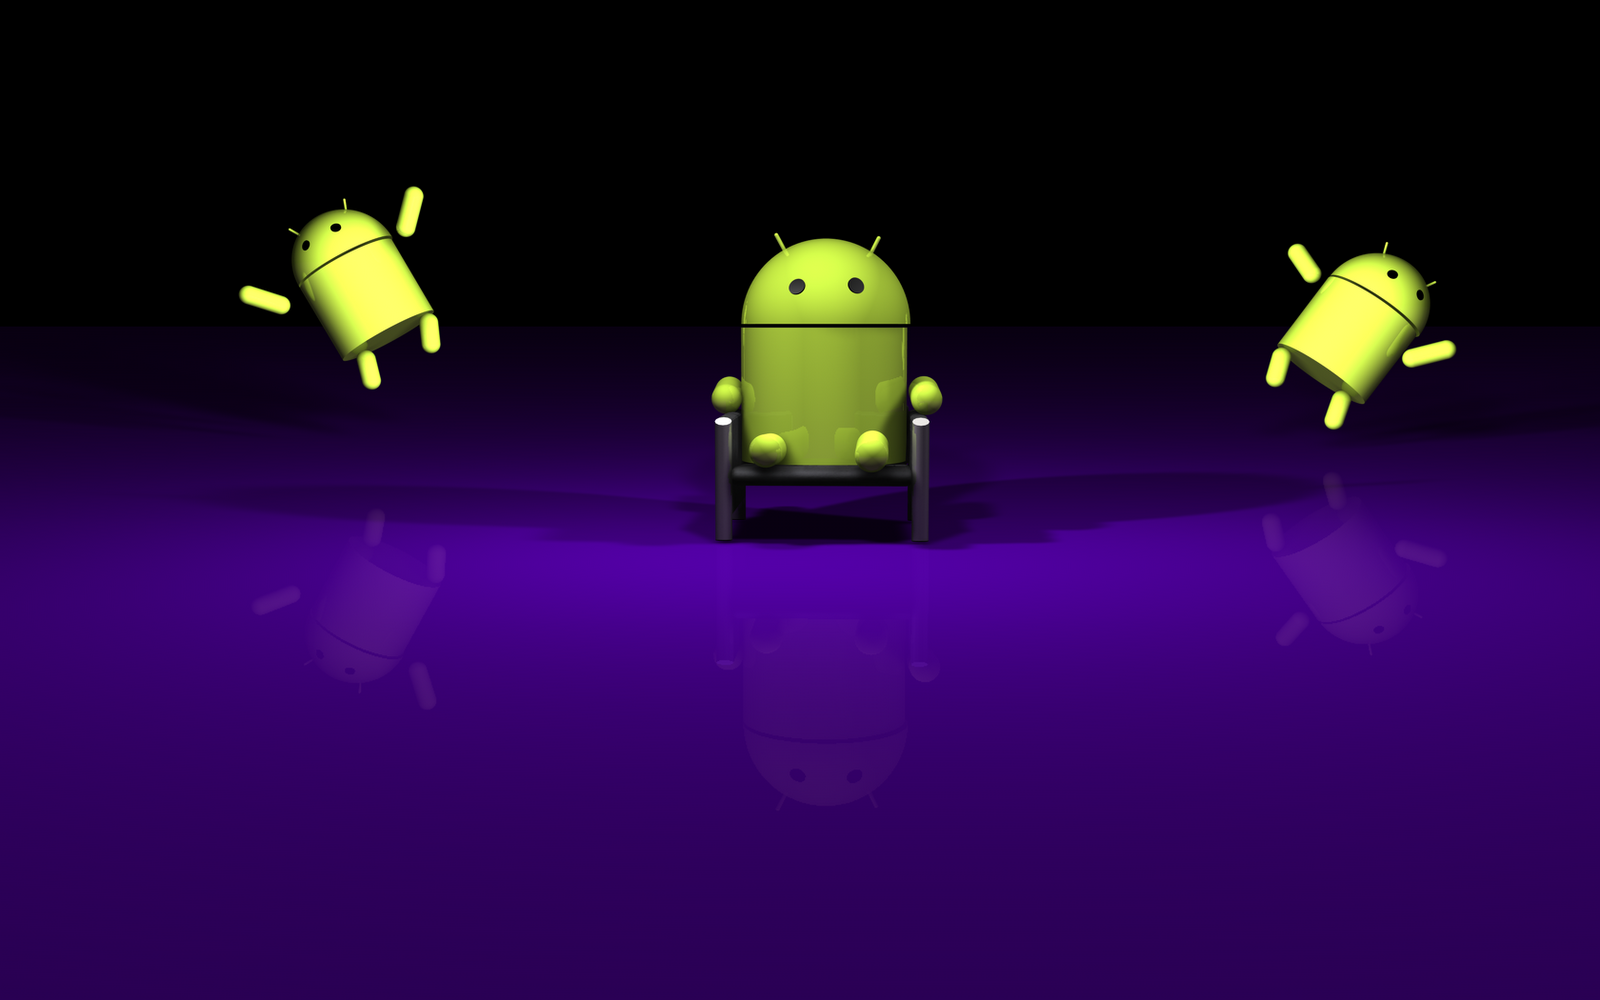 wallpapers 3d android,purple,violet,green,graphic design,cartoon